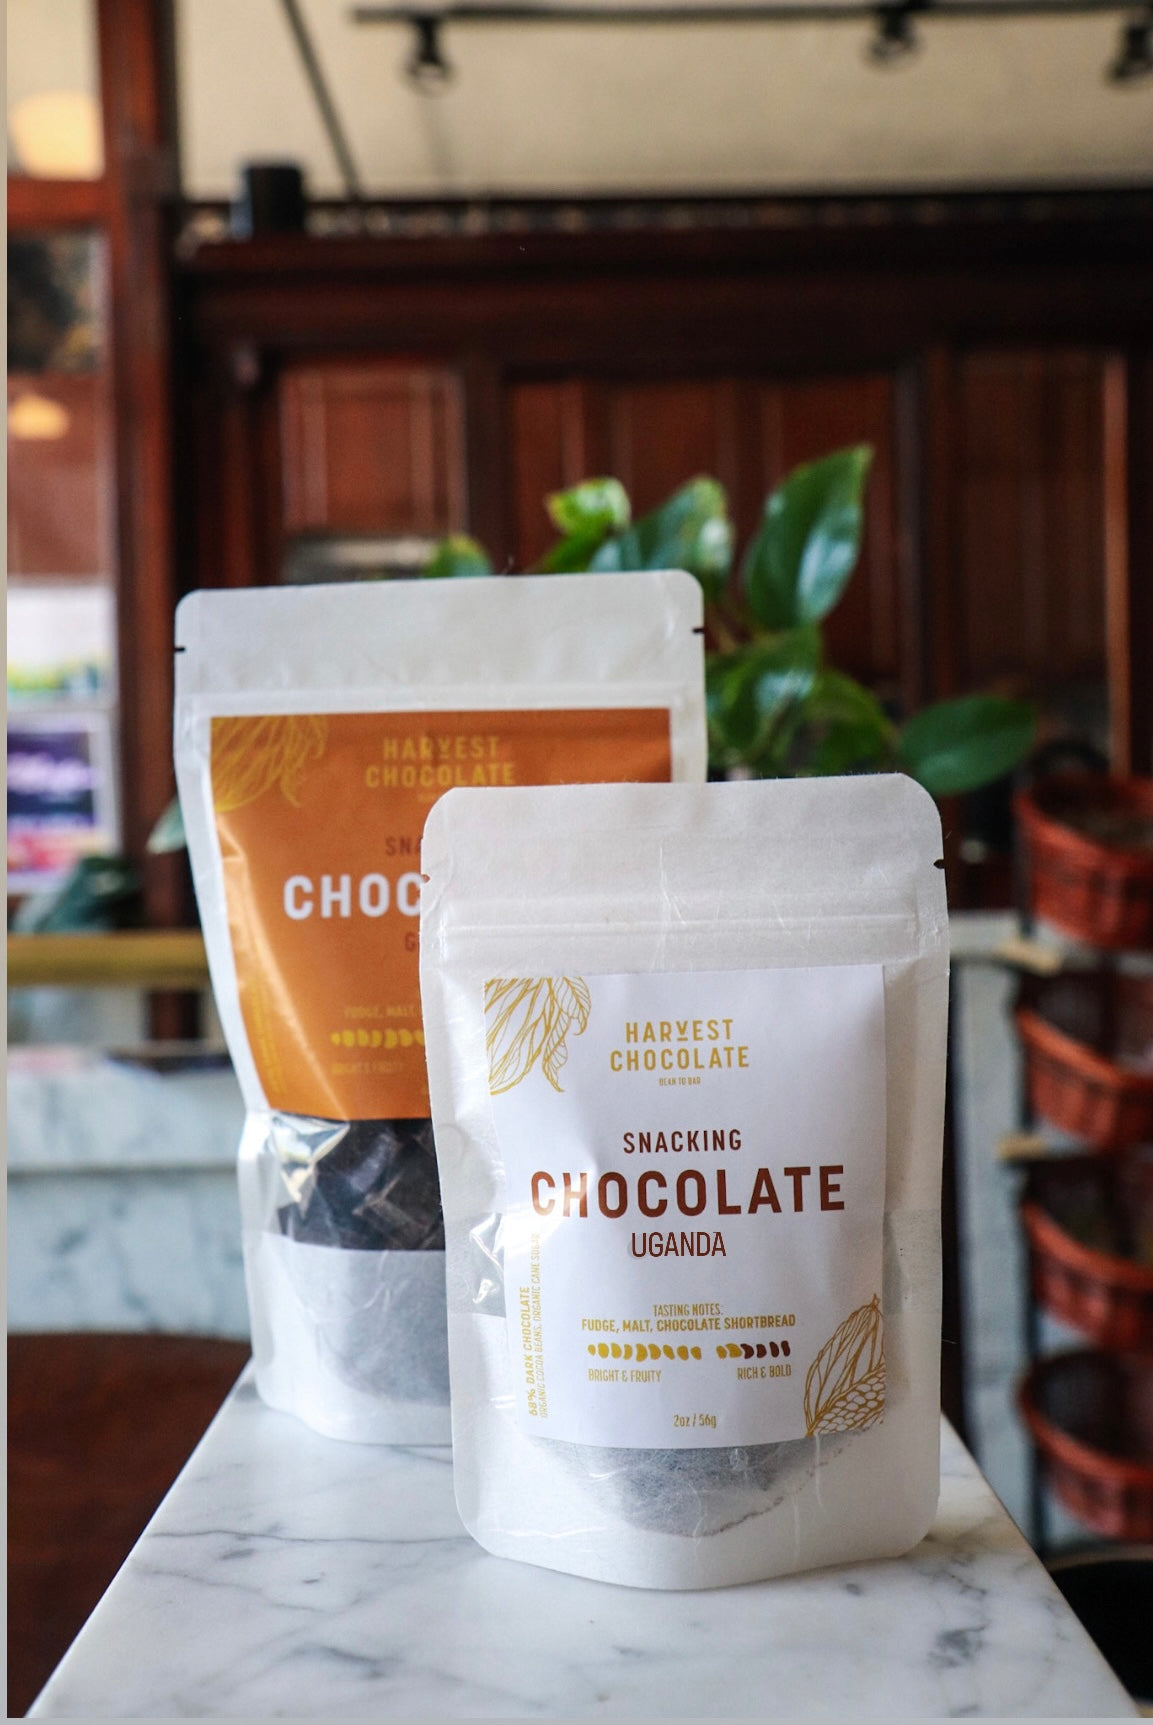 Two bags of Uganda Snacking Chocolate, labeled "Uganda" and "Haiti," standing on a marble counter in a room with wooden accents and green plants in the background.